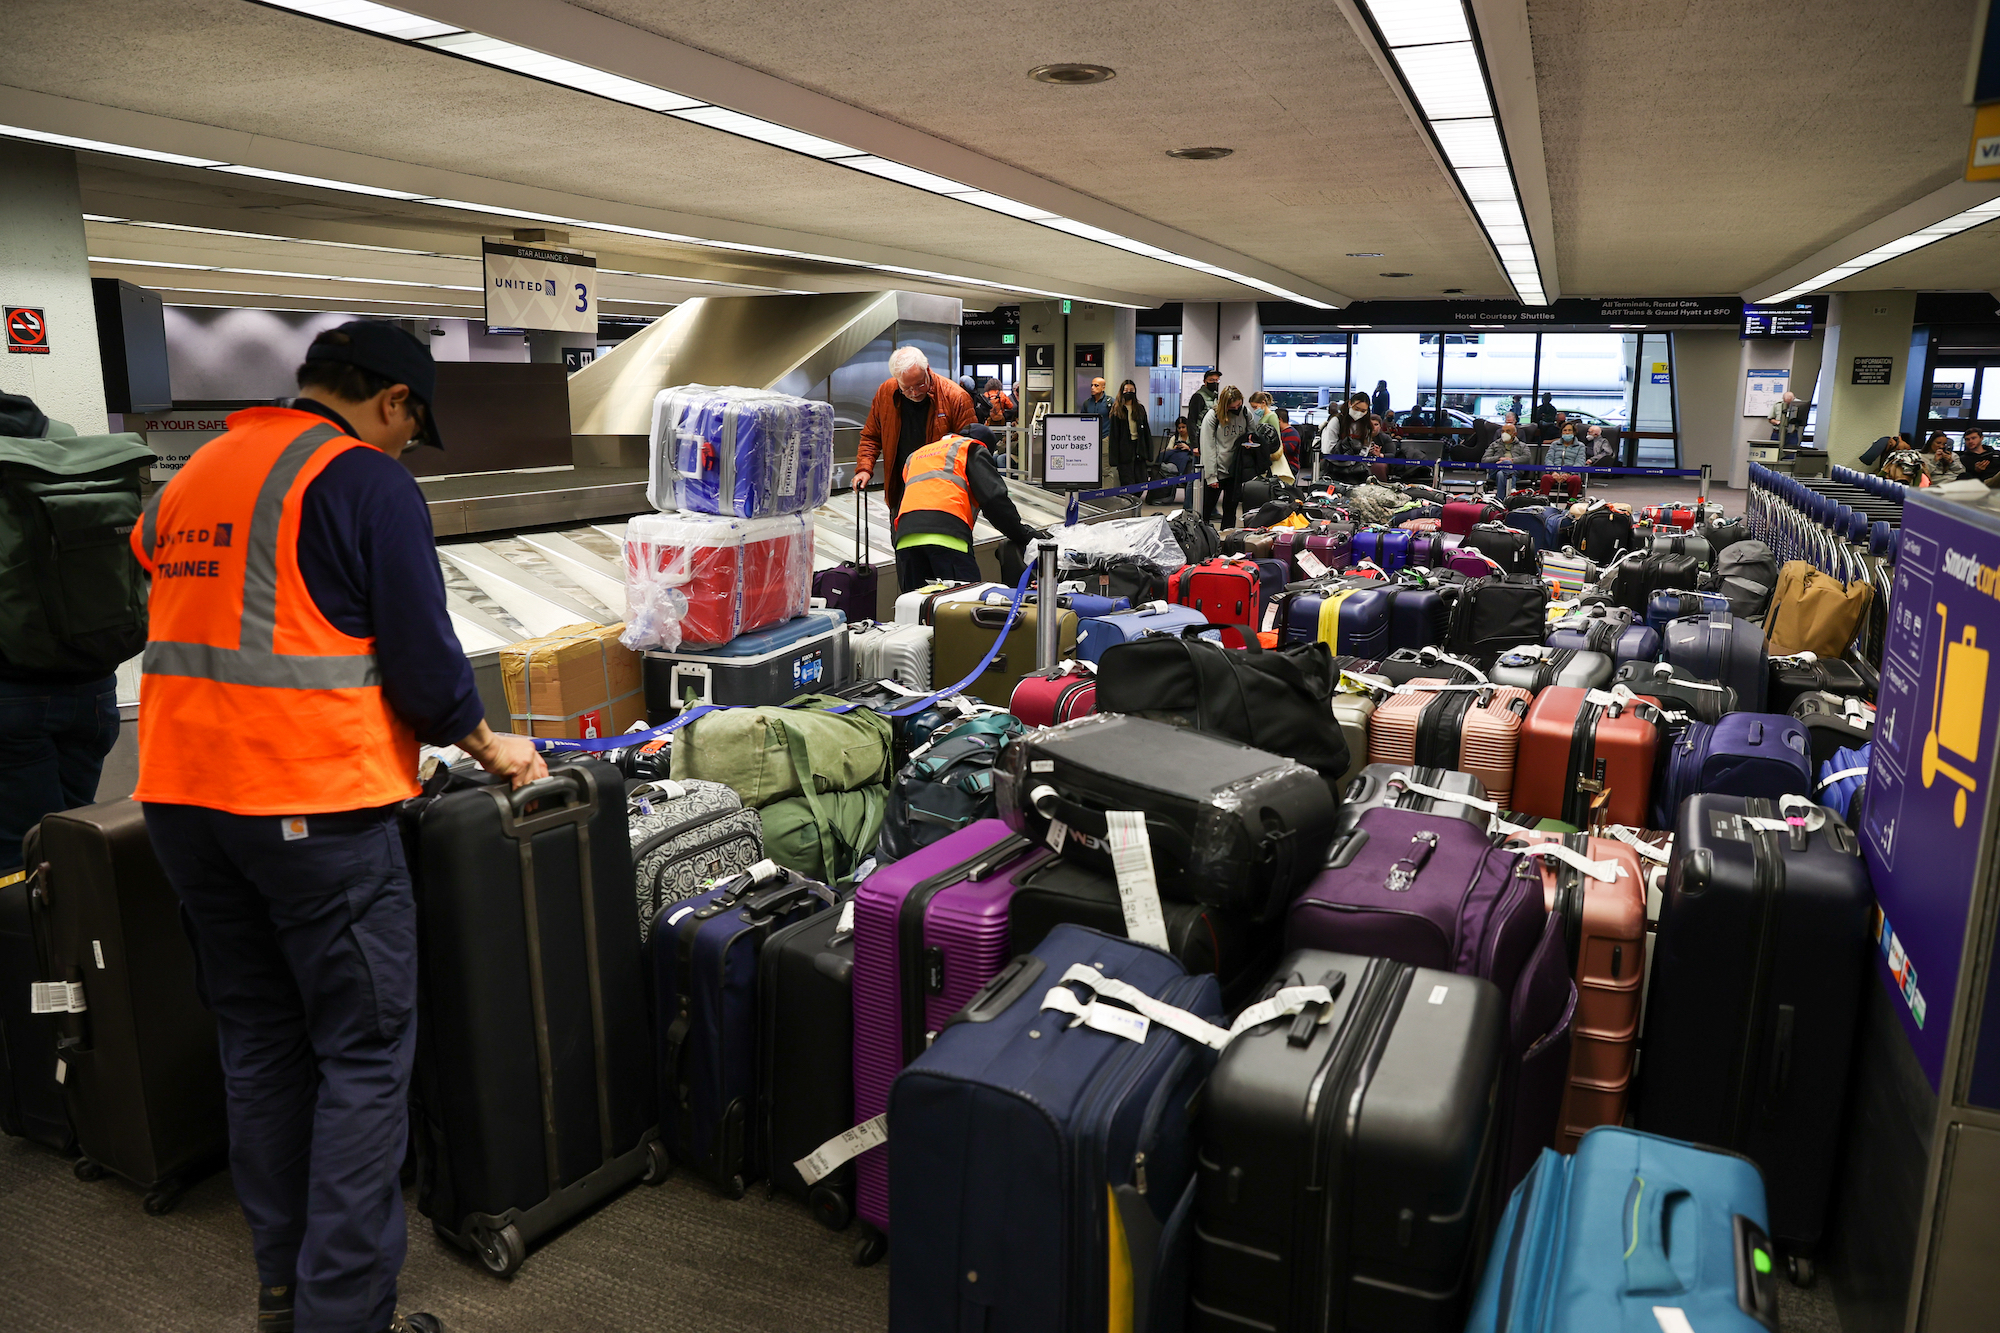 Luggage is seen at San Francisco International Airport due to airline cancellations on Friday.